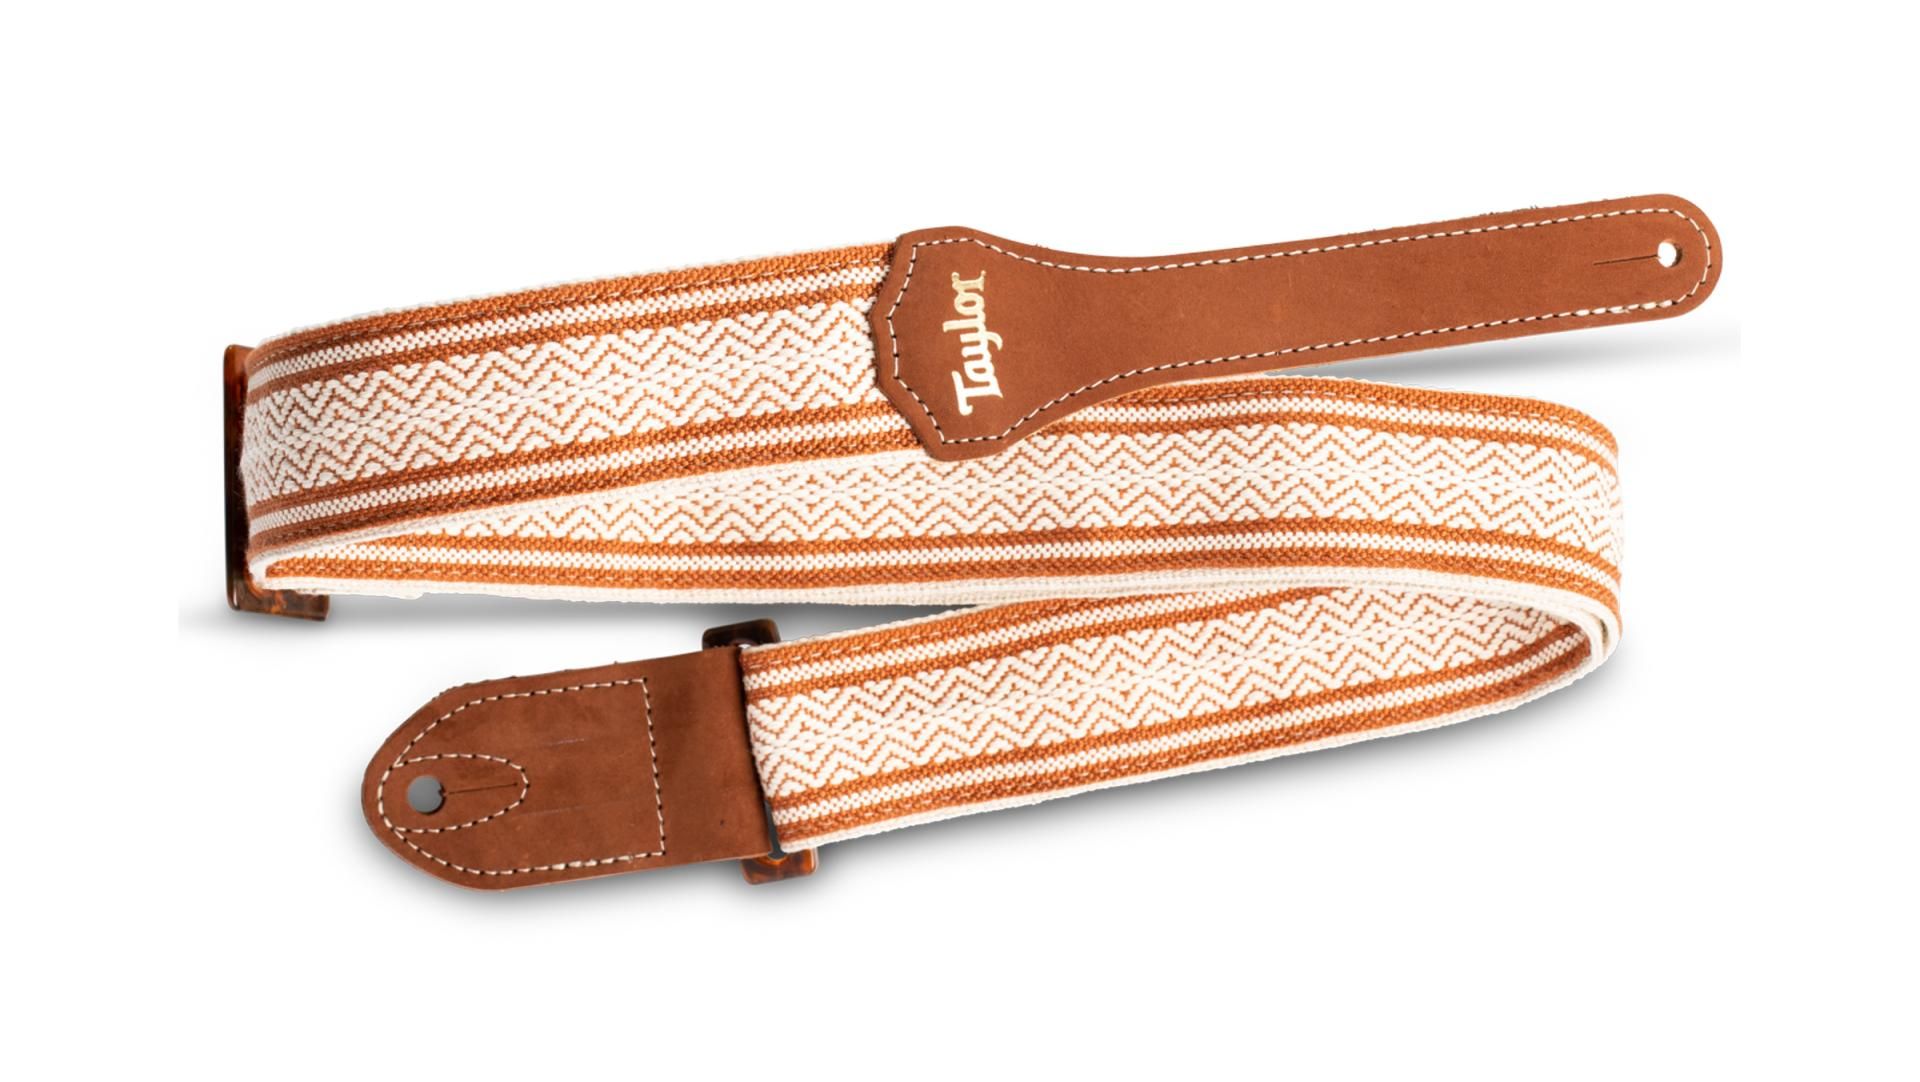 Taylor 2 Academy Jacquard Leather Guitar Strap